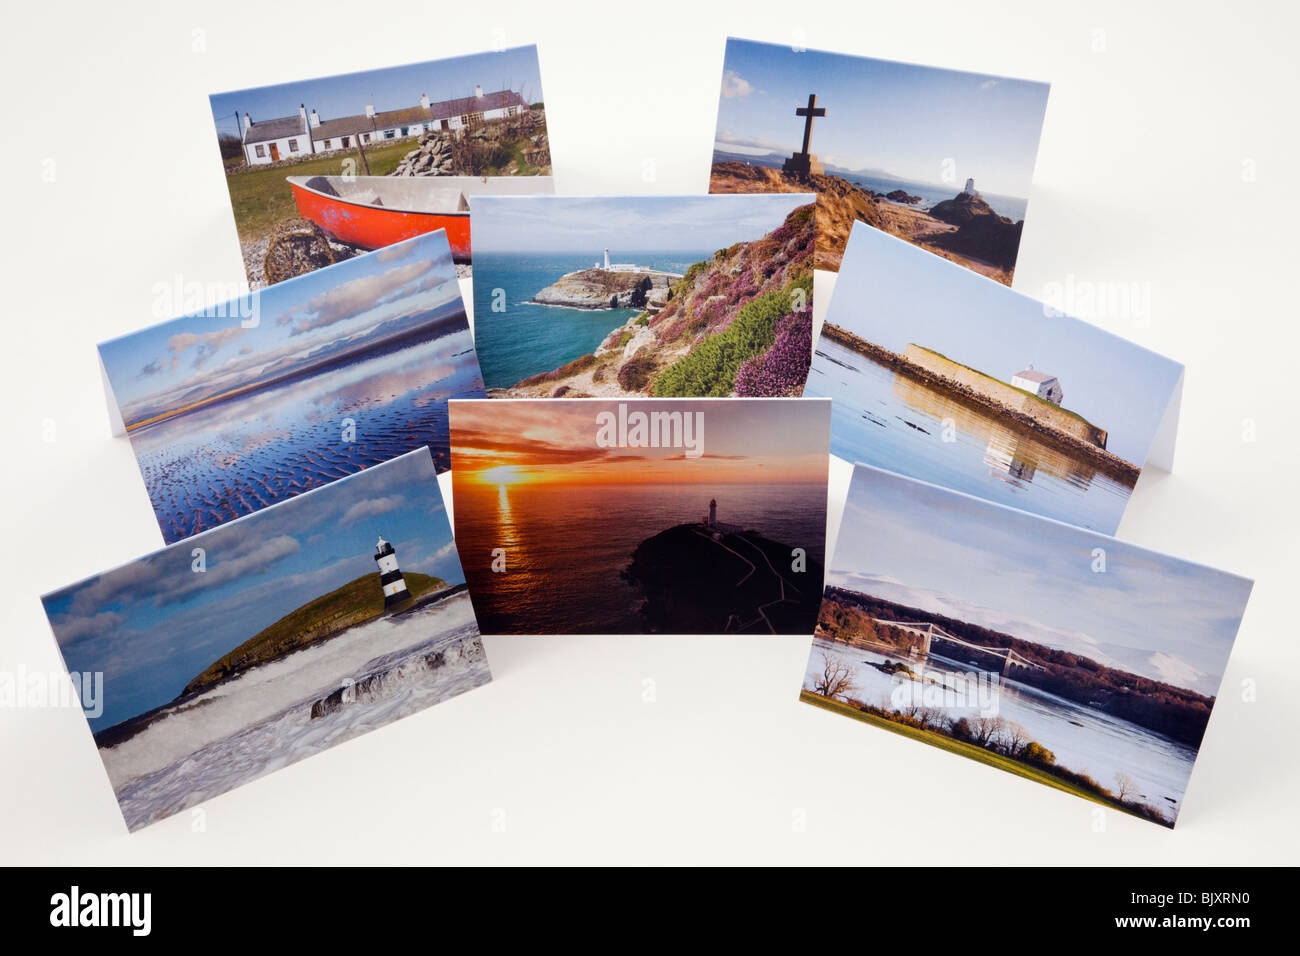 UK, Britain. Selection of photographic greeting cards showing landscapes of Anglesey on a white background Stock Photo